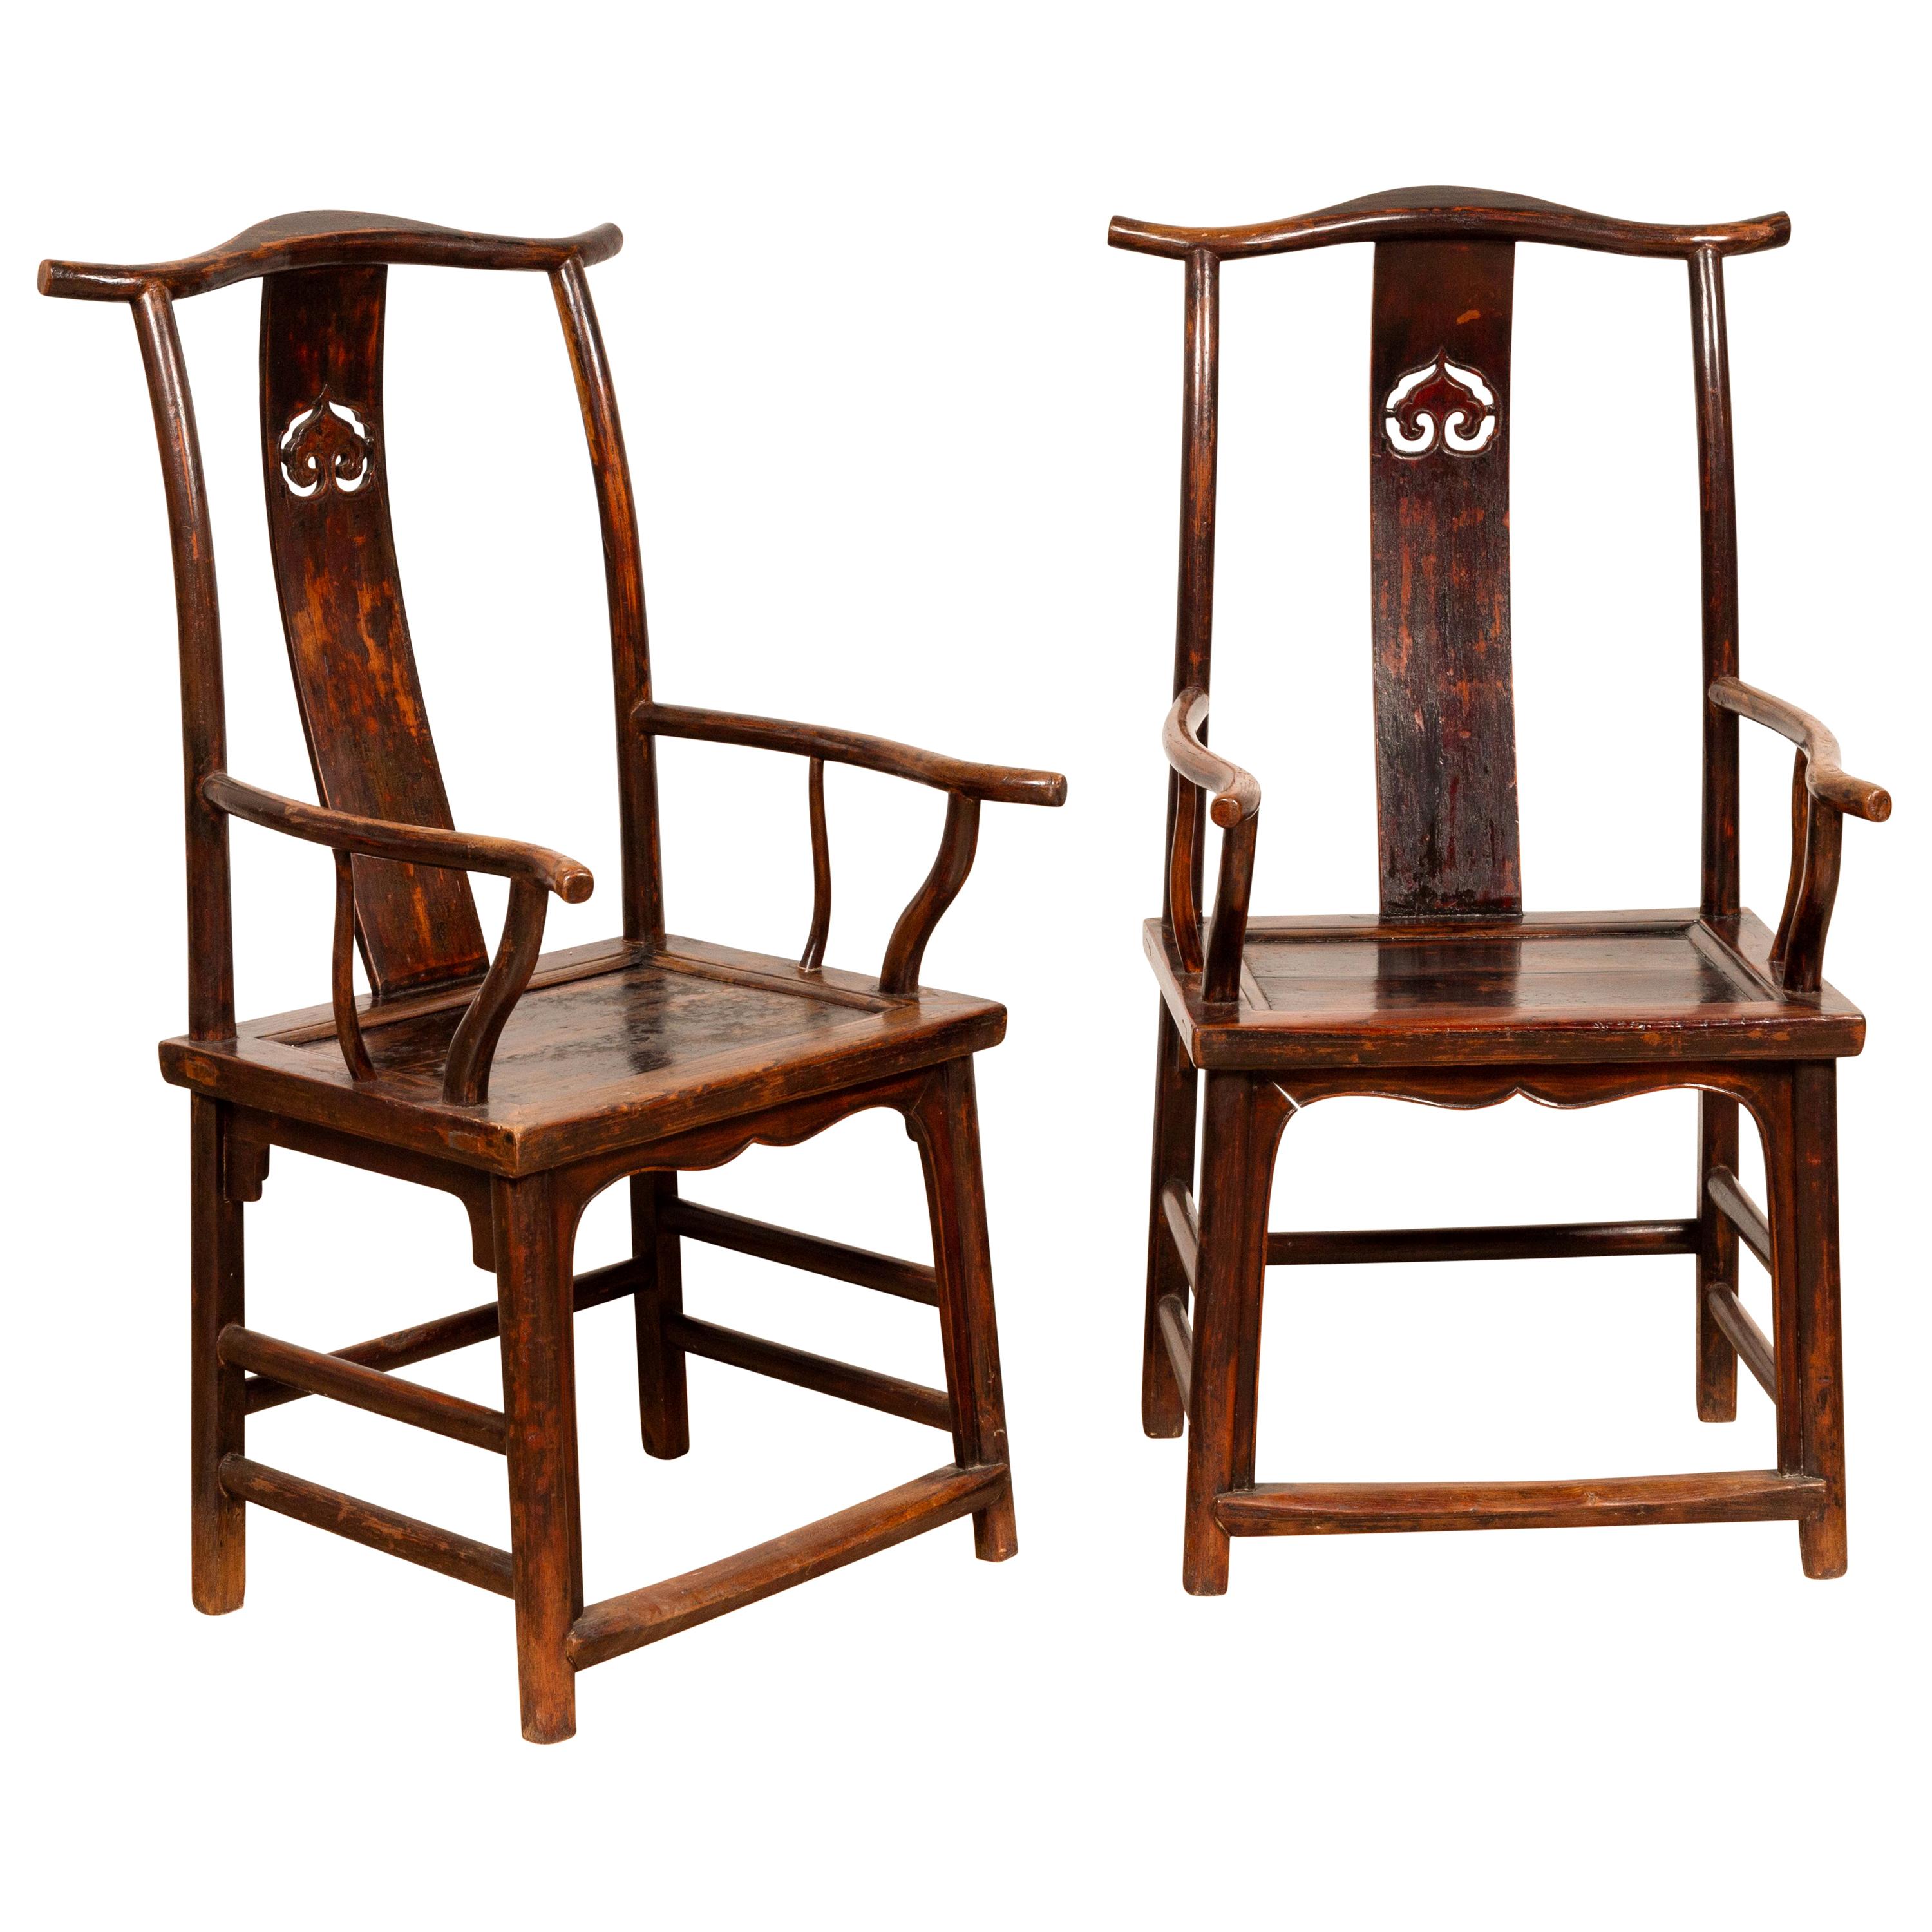 Pair of Chinese 1880s Official's Hat Chairs with Pierced Splats and Curving Arms